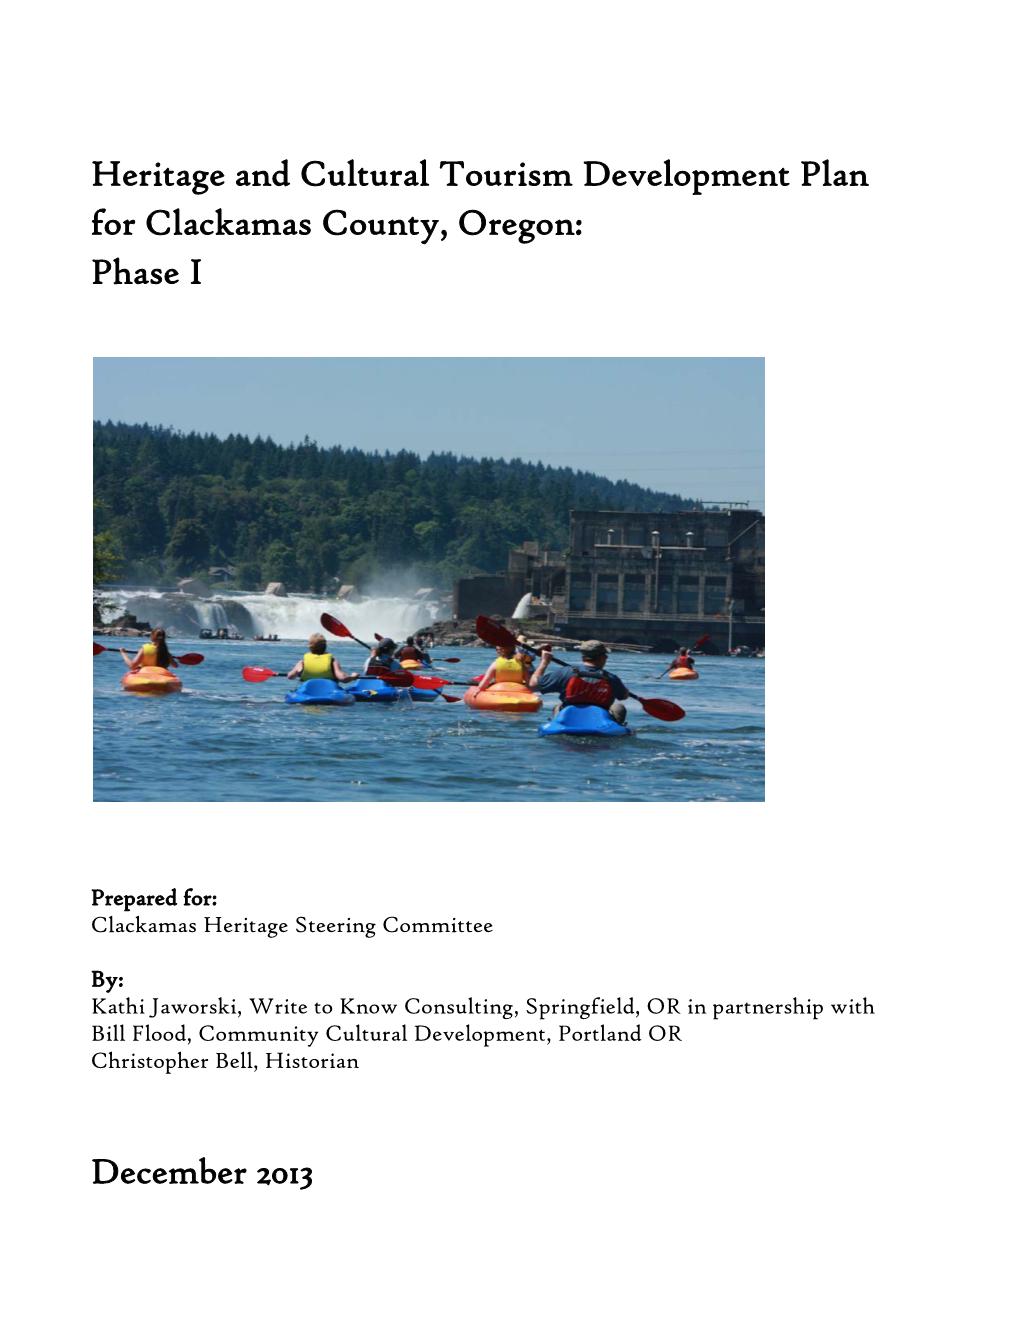 Heritage and Cultural Tourism Development Plan for Clackamas County, Oregon: Phase I